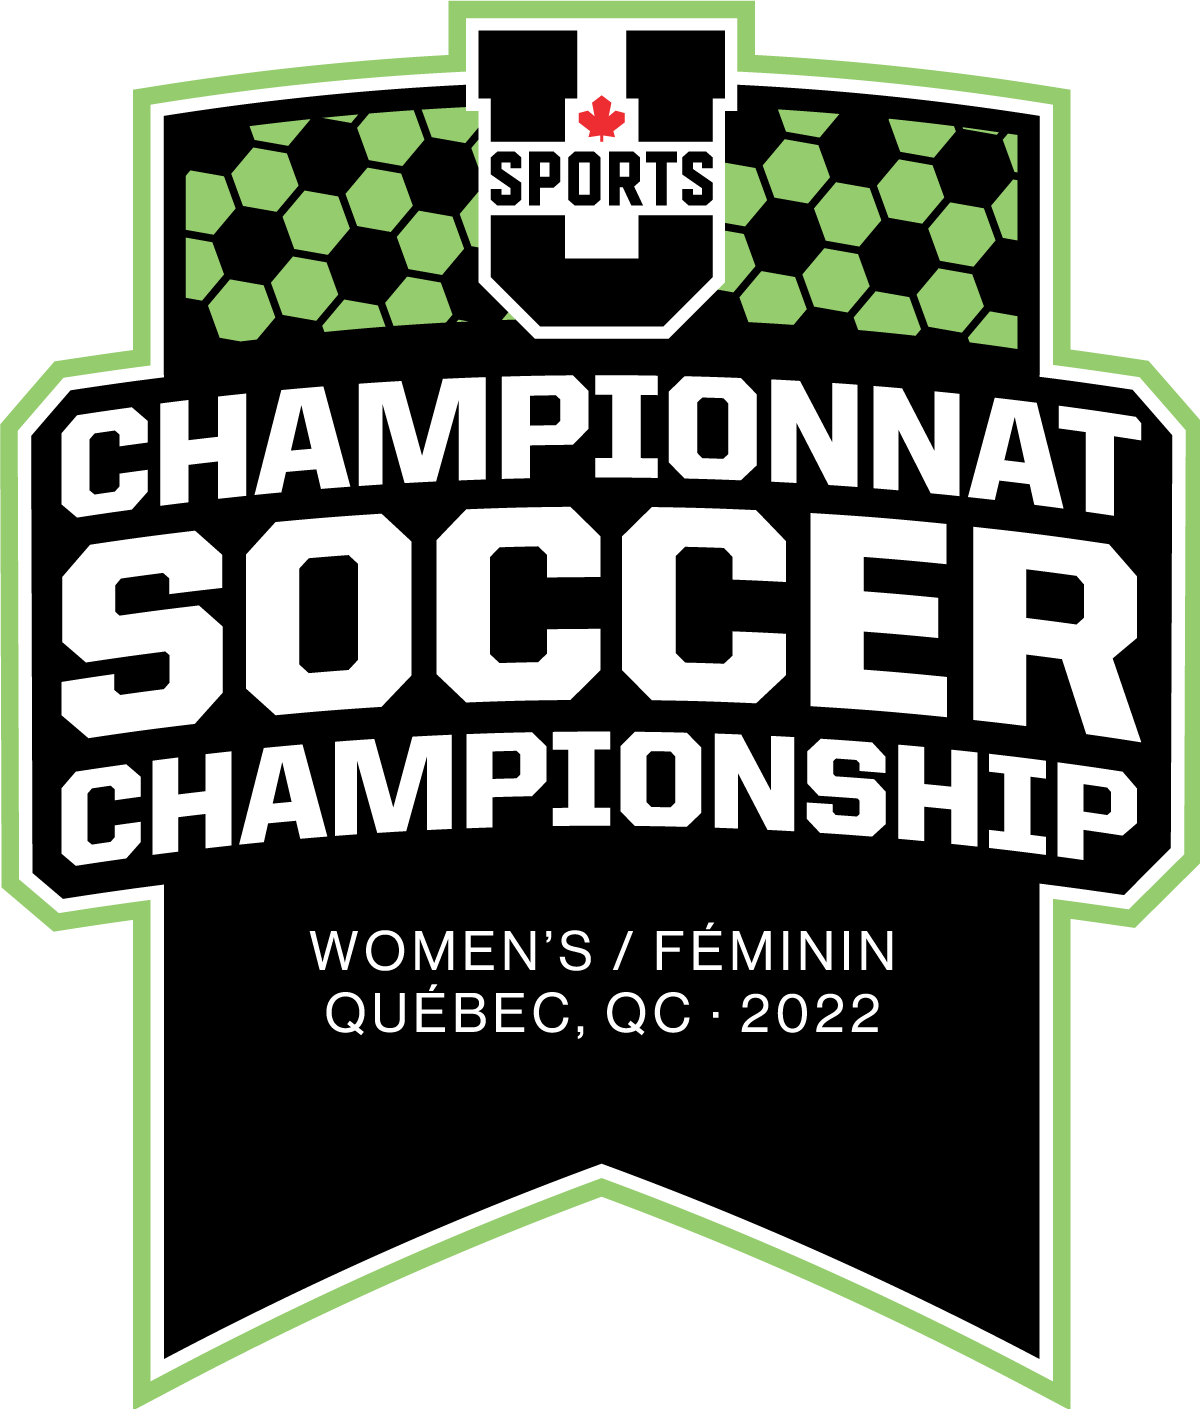 USports_Champ2223_SoccerW_Primary_CMYK_BL.png (85 KB)